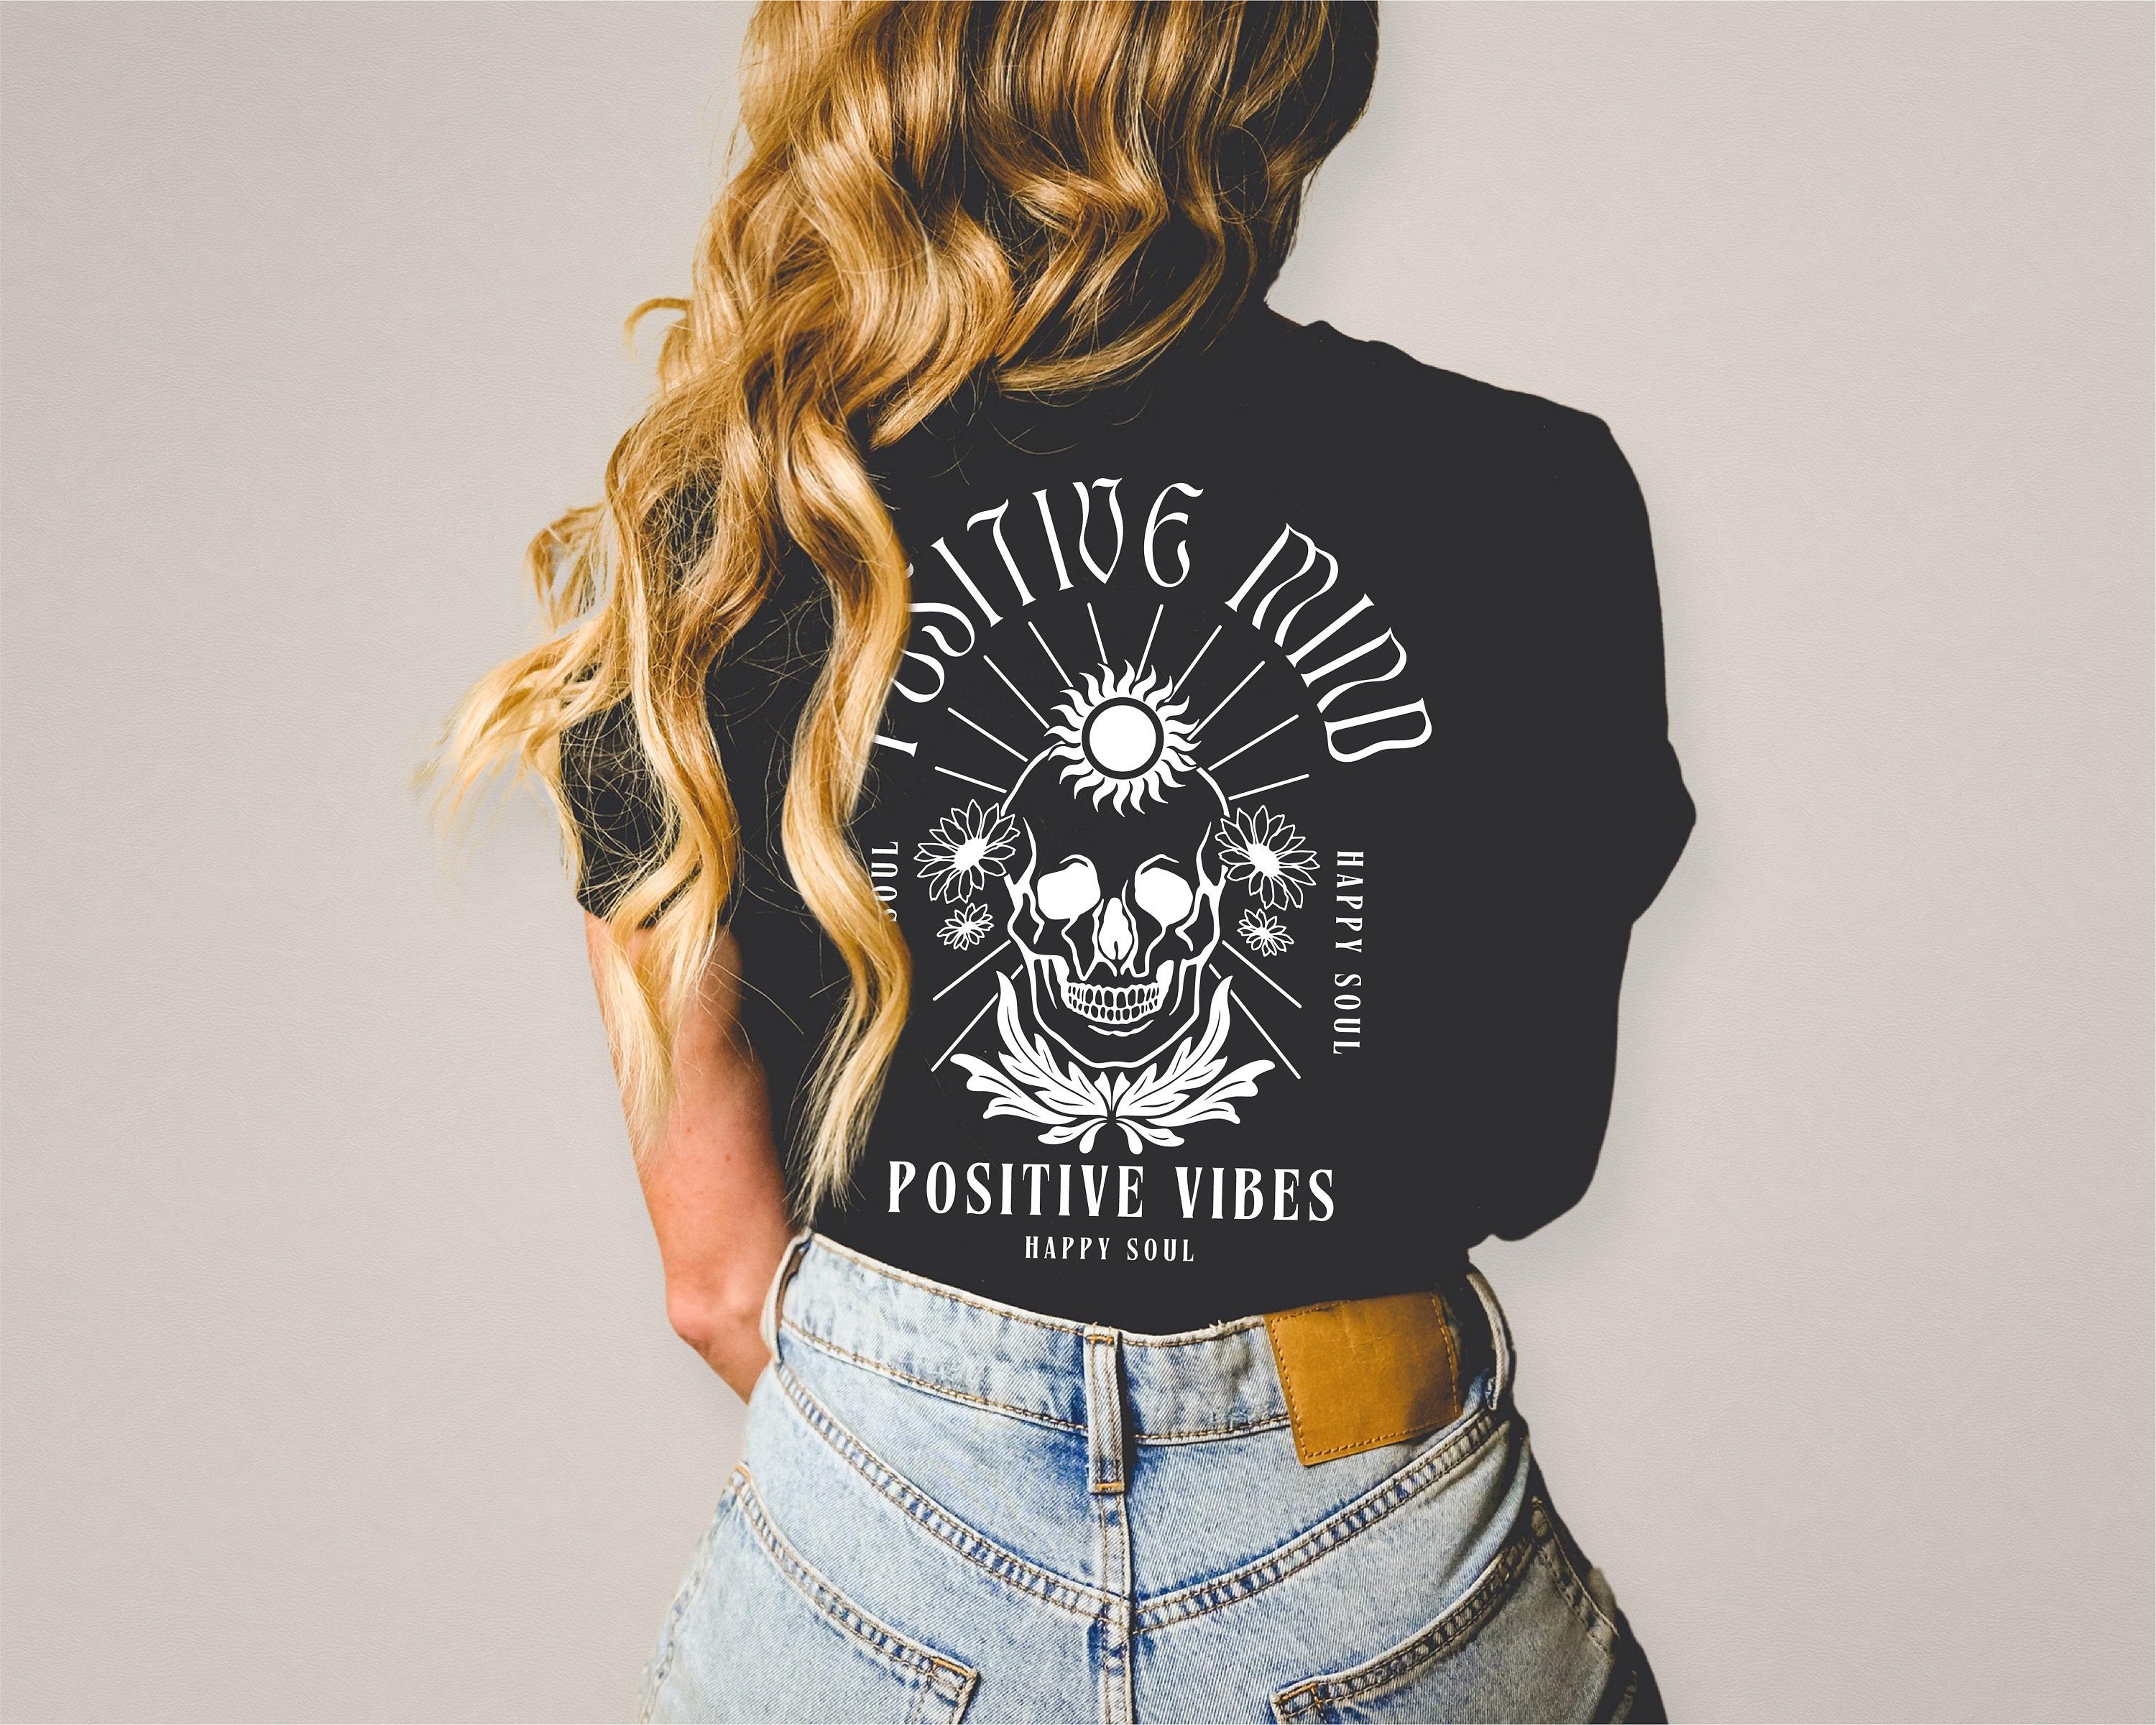 Discover Funny Stay Positive Shirt, Funny Skeleton Shirt, Stay Positive Skull Shirt, Funny Saying Skull Shirt, Positive Vibes Shirt, Motivational Tee